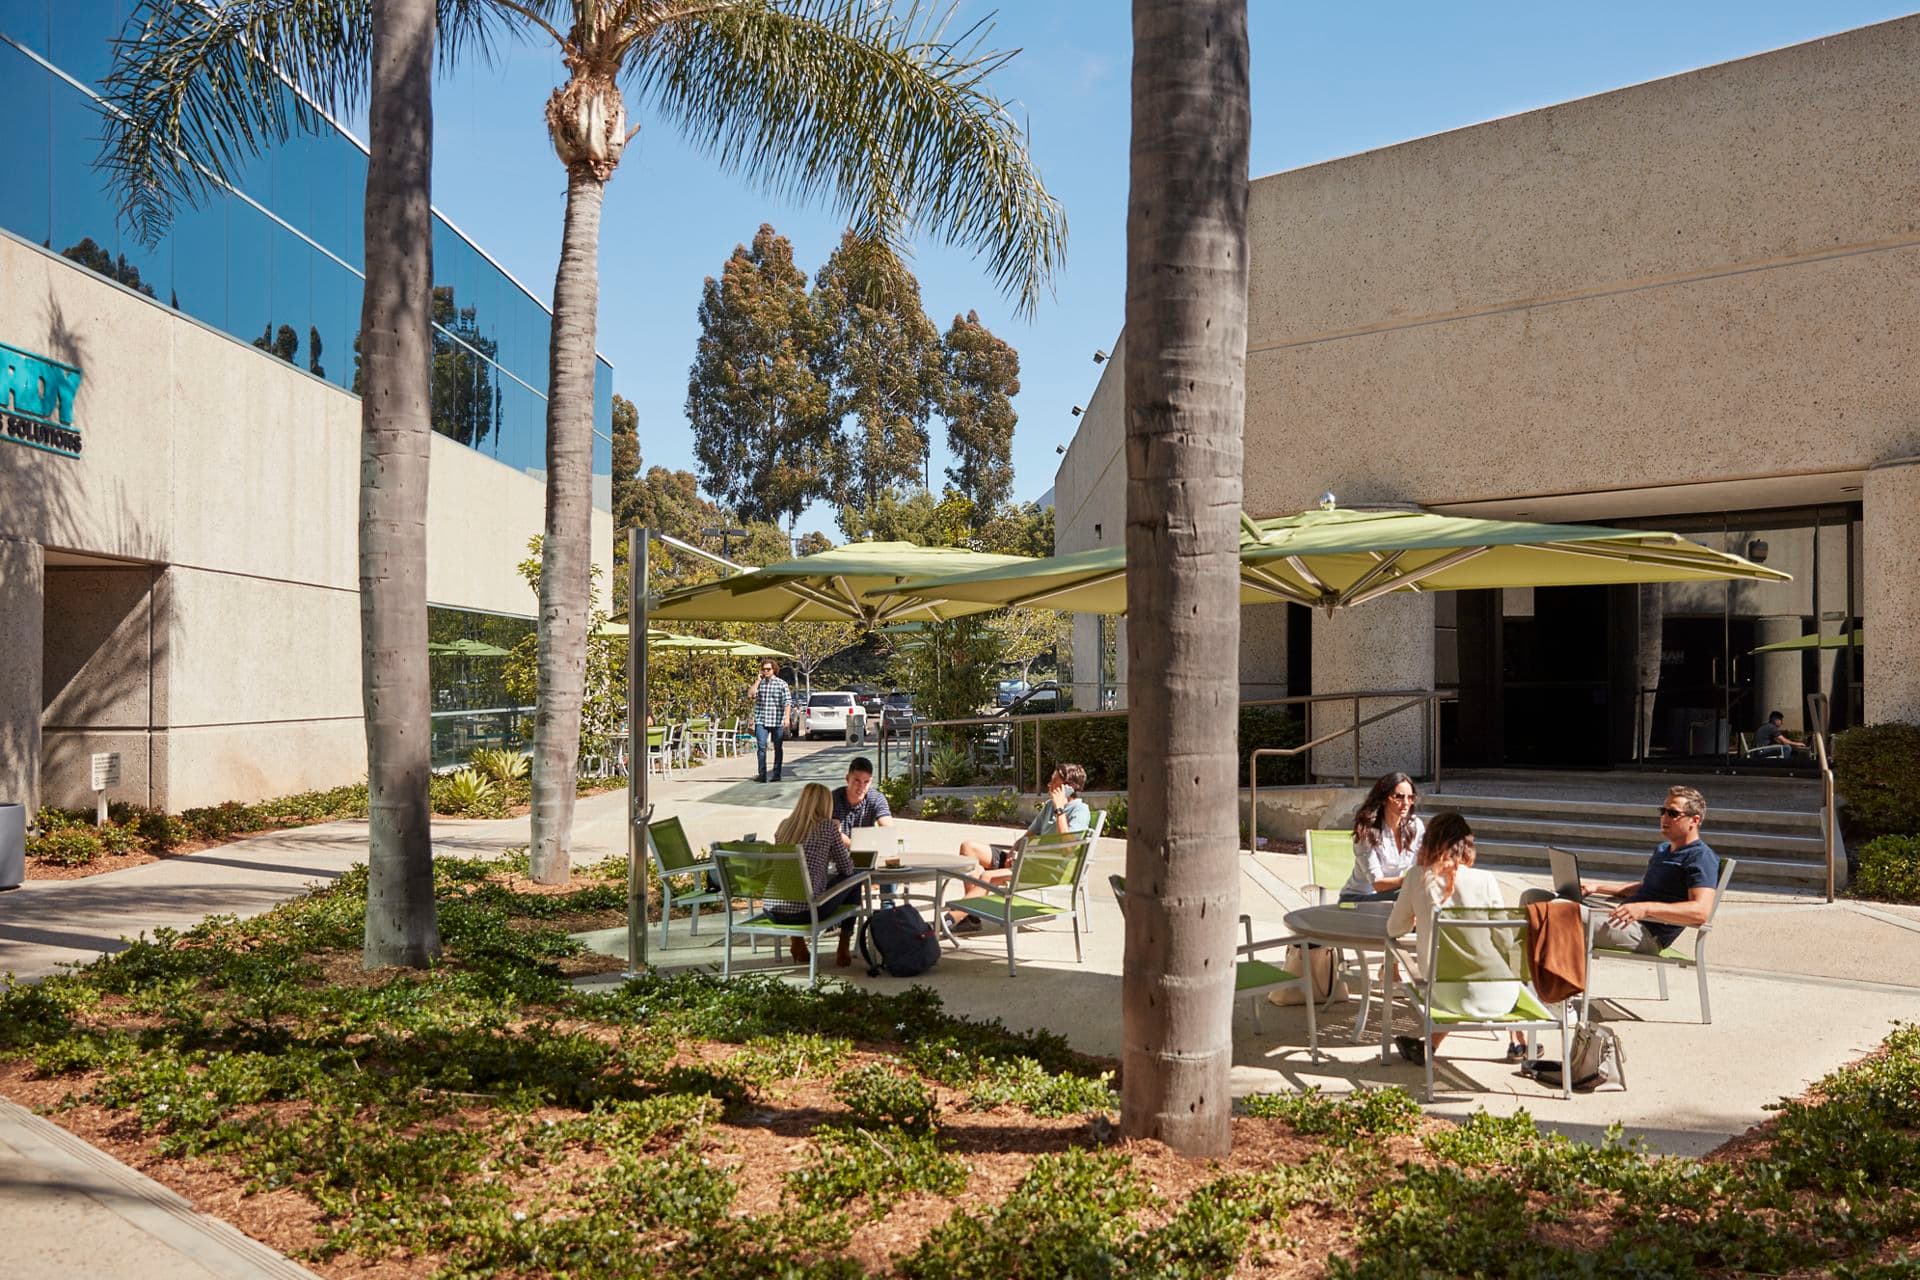 Outdoor workspace photography at Canyon Ridge, San Diego, CA